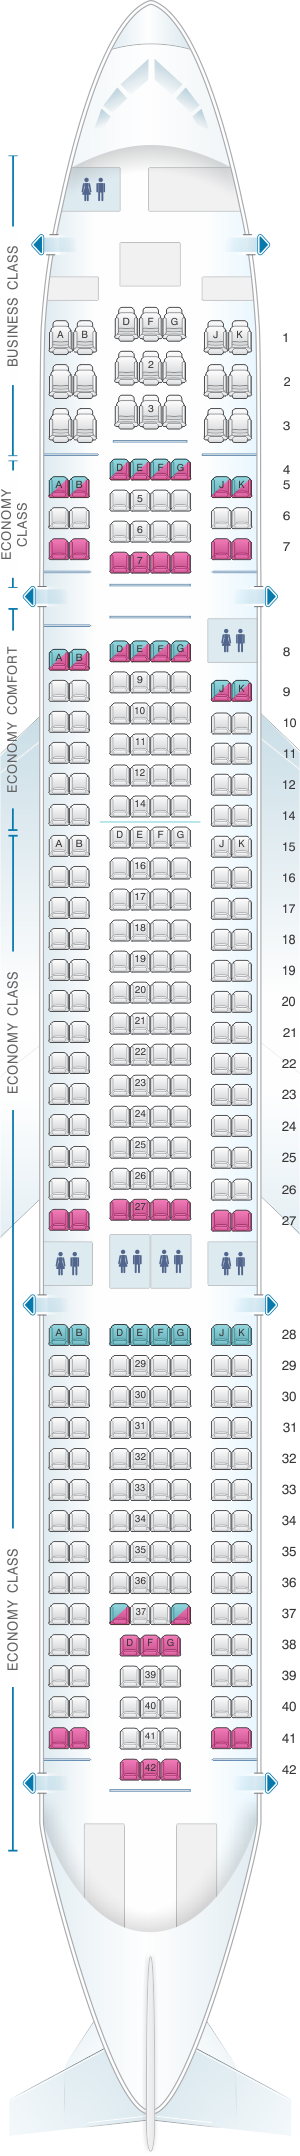 Seat Map Eurowings Airbus A330 0 Seatmaestro